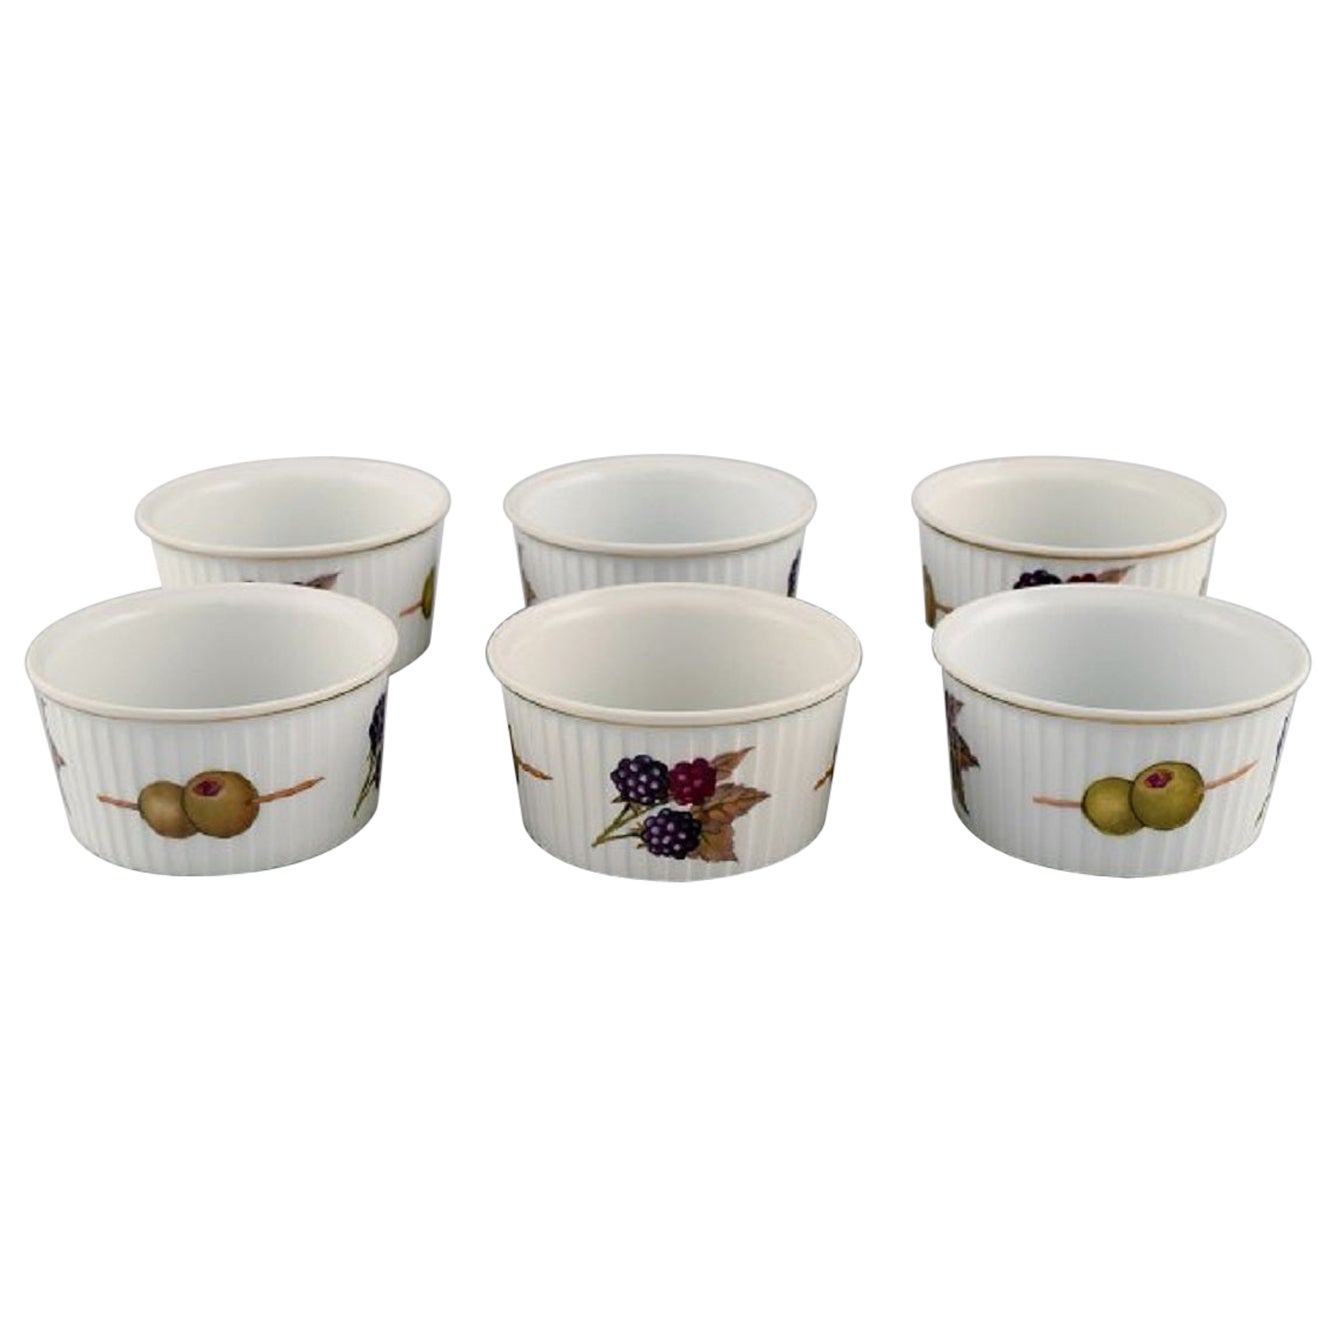 Royal Worcester, England, Six Small Evesham Porcelain Bowls with Fruits